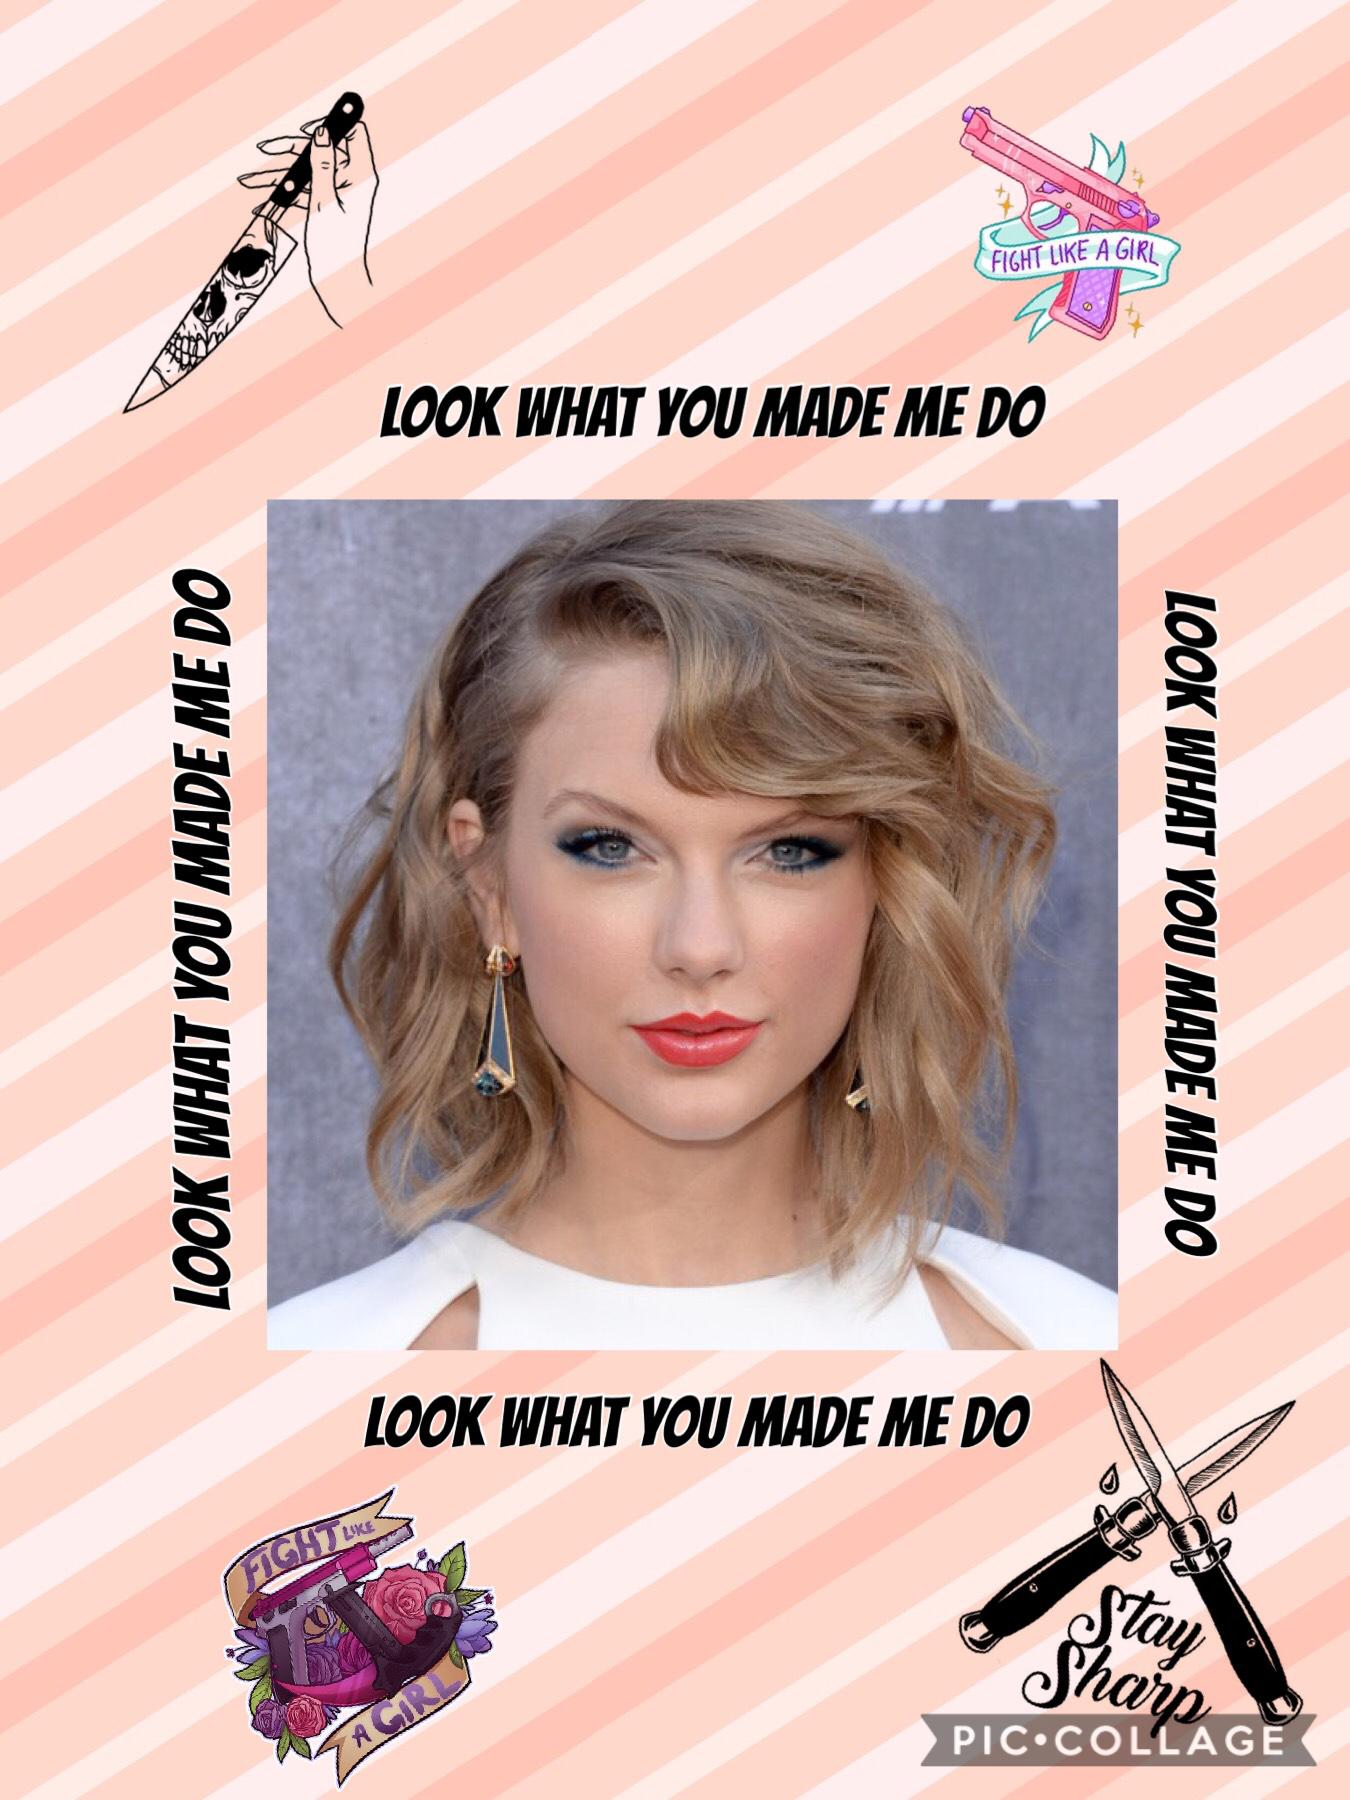 #GIRLPOWER
Btw, “look what you made me do” is actually a song by Taylor Swift, and the lyrics in that song were my inspiration to this, so don’t hate and say “ugh, this chick has no idea what she is talking about. This is like literally a song”, ‘cause if